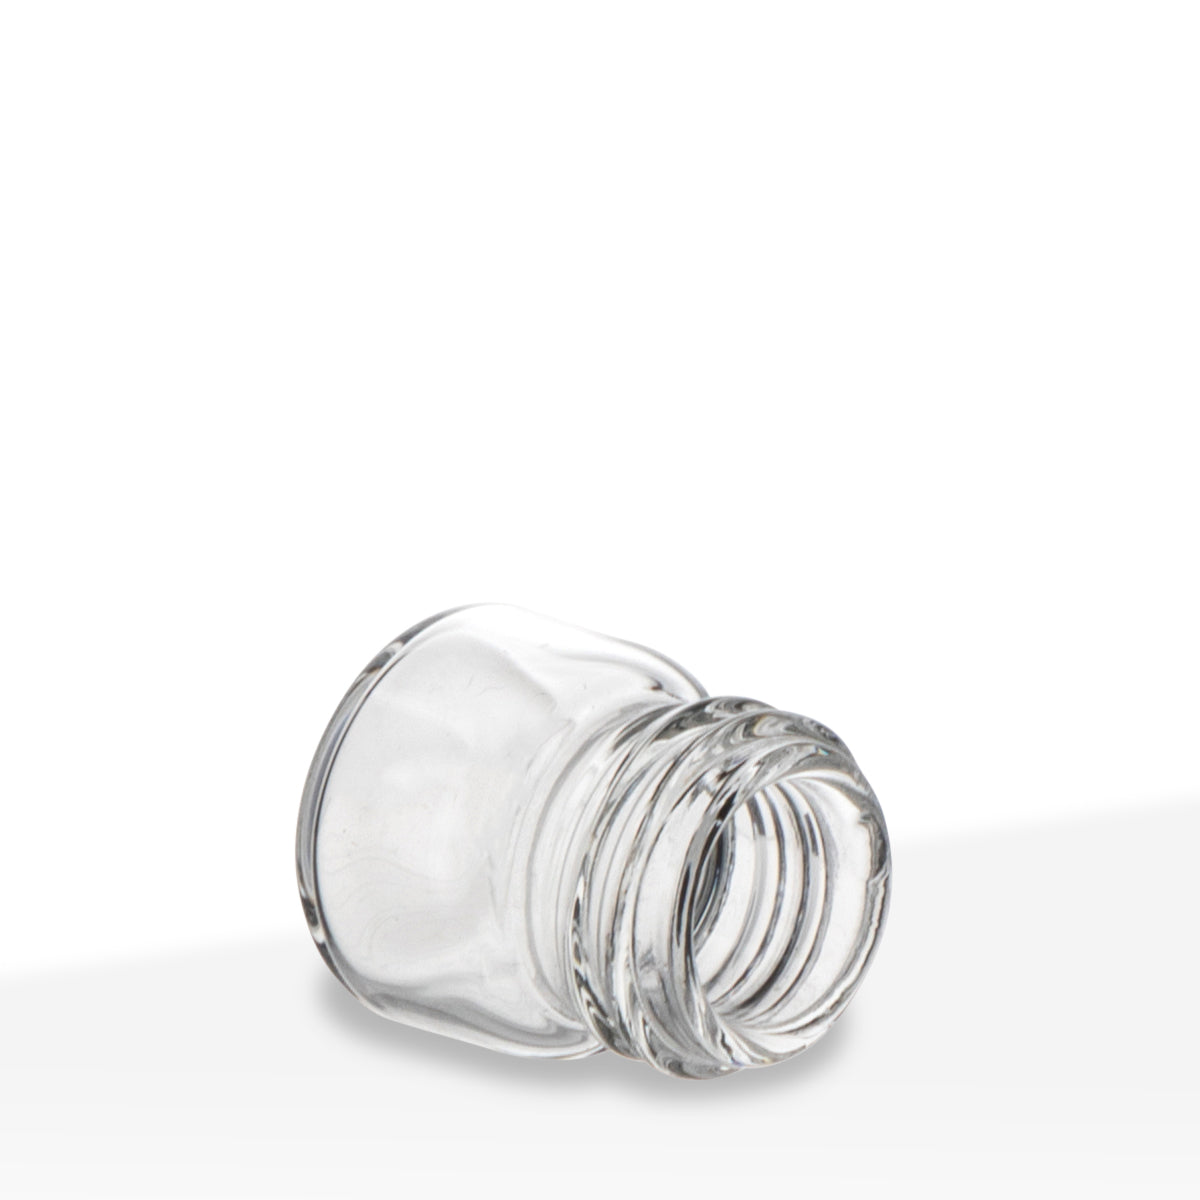 GLASS VIAL CLEAR VC131517 - 144 CT